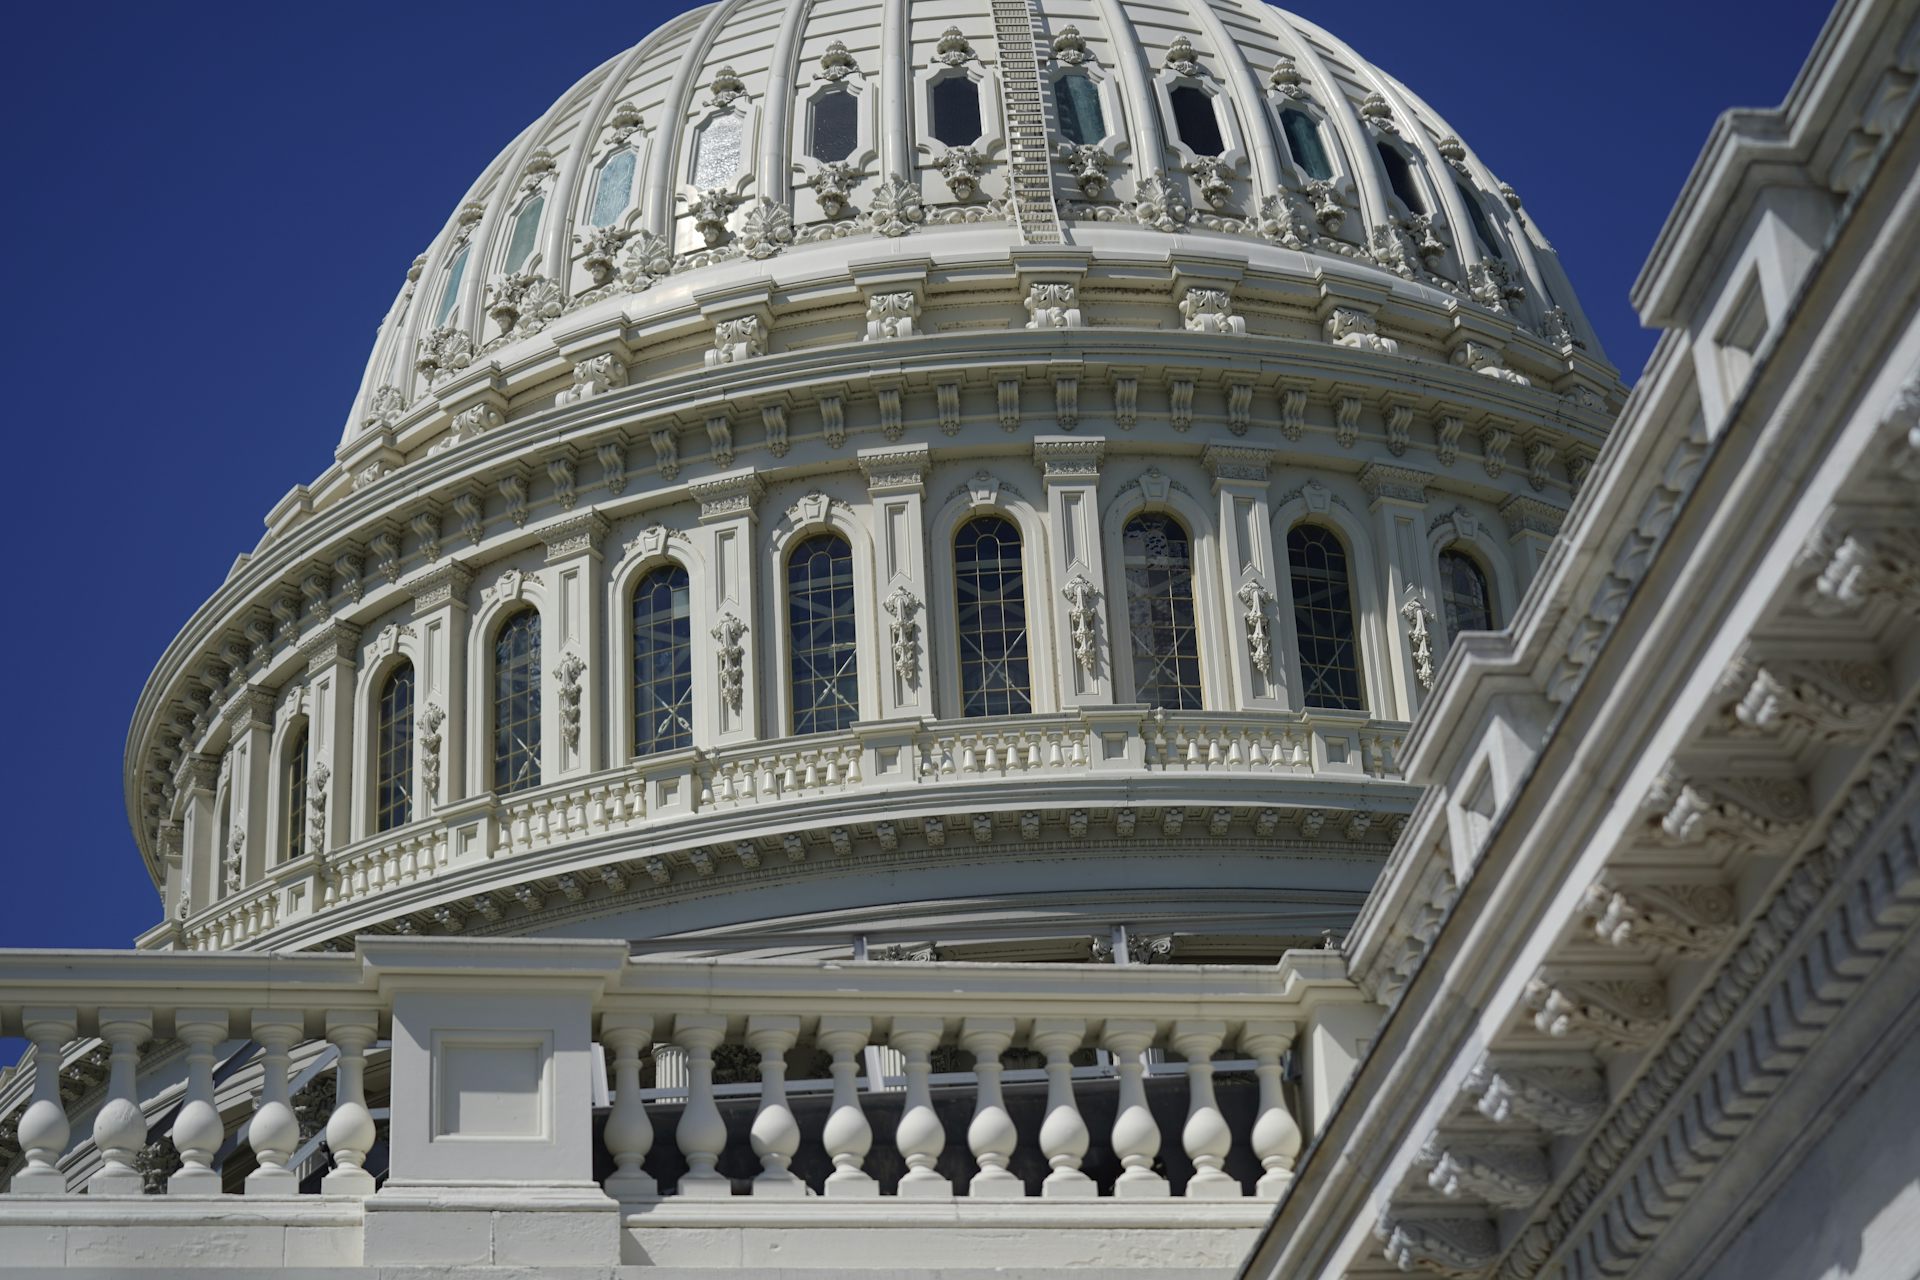 Workhorses, not show horses: Five ways to promote effective lawmaking in Congress